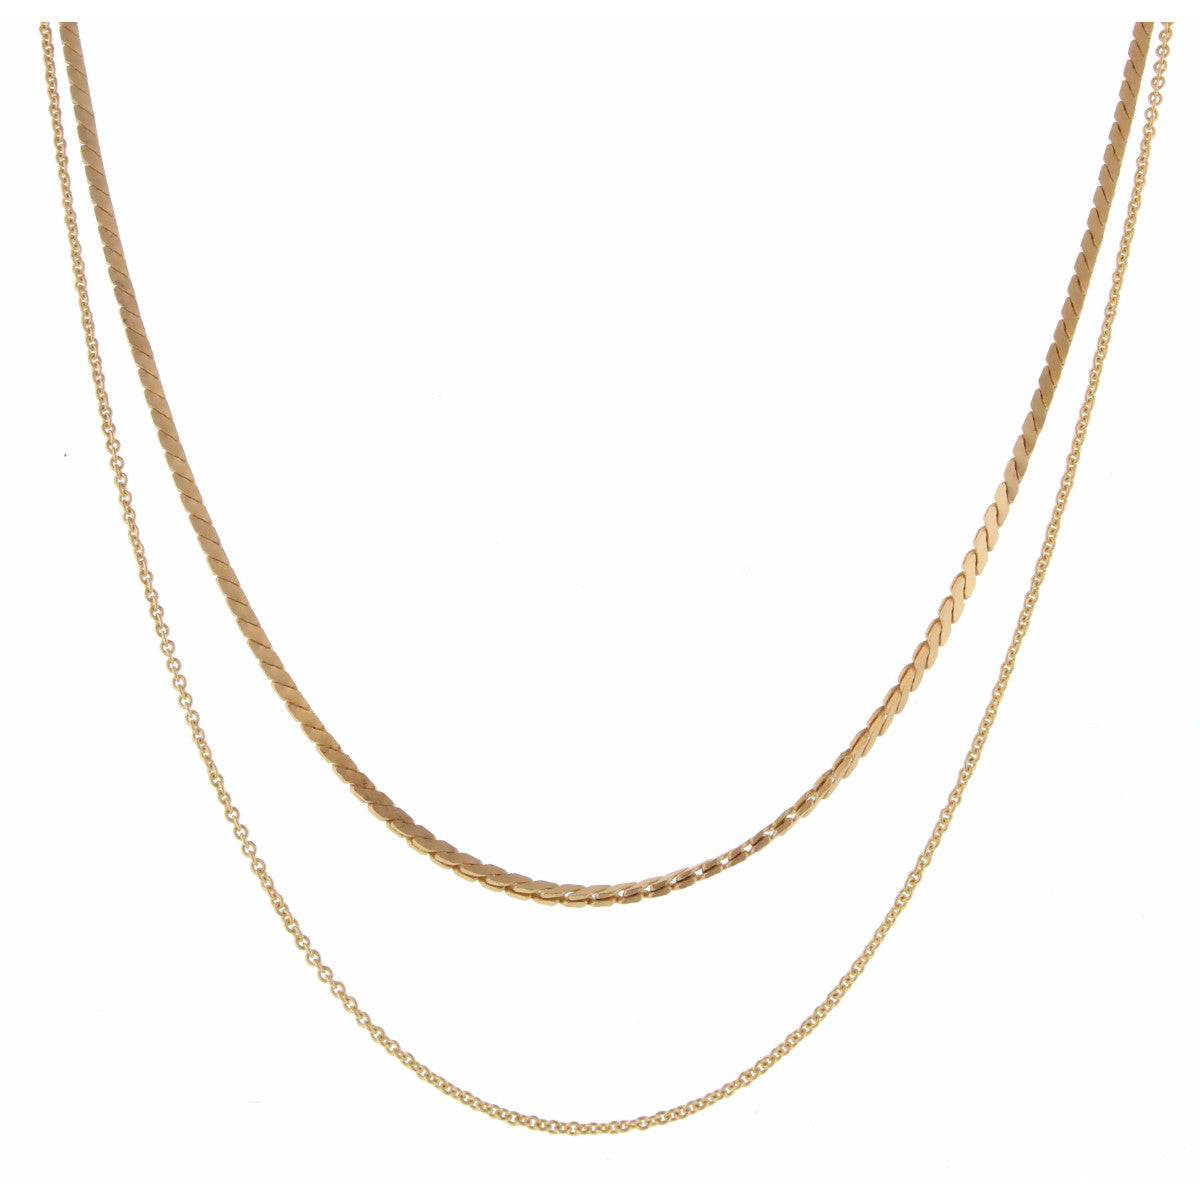 16", 18" 2 Layer Dainty Gold Cable and Serpentine Chain Necklace